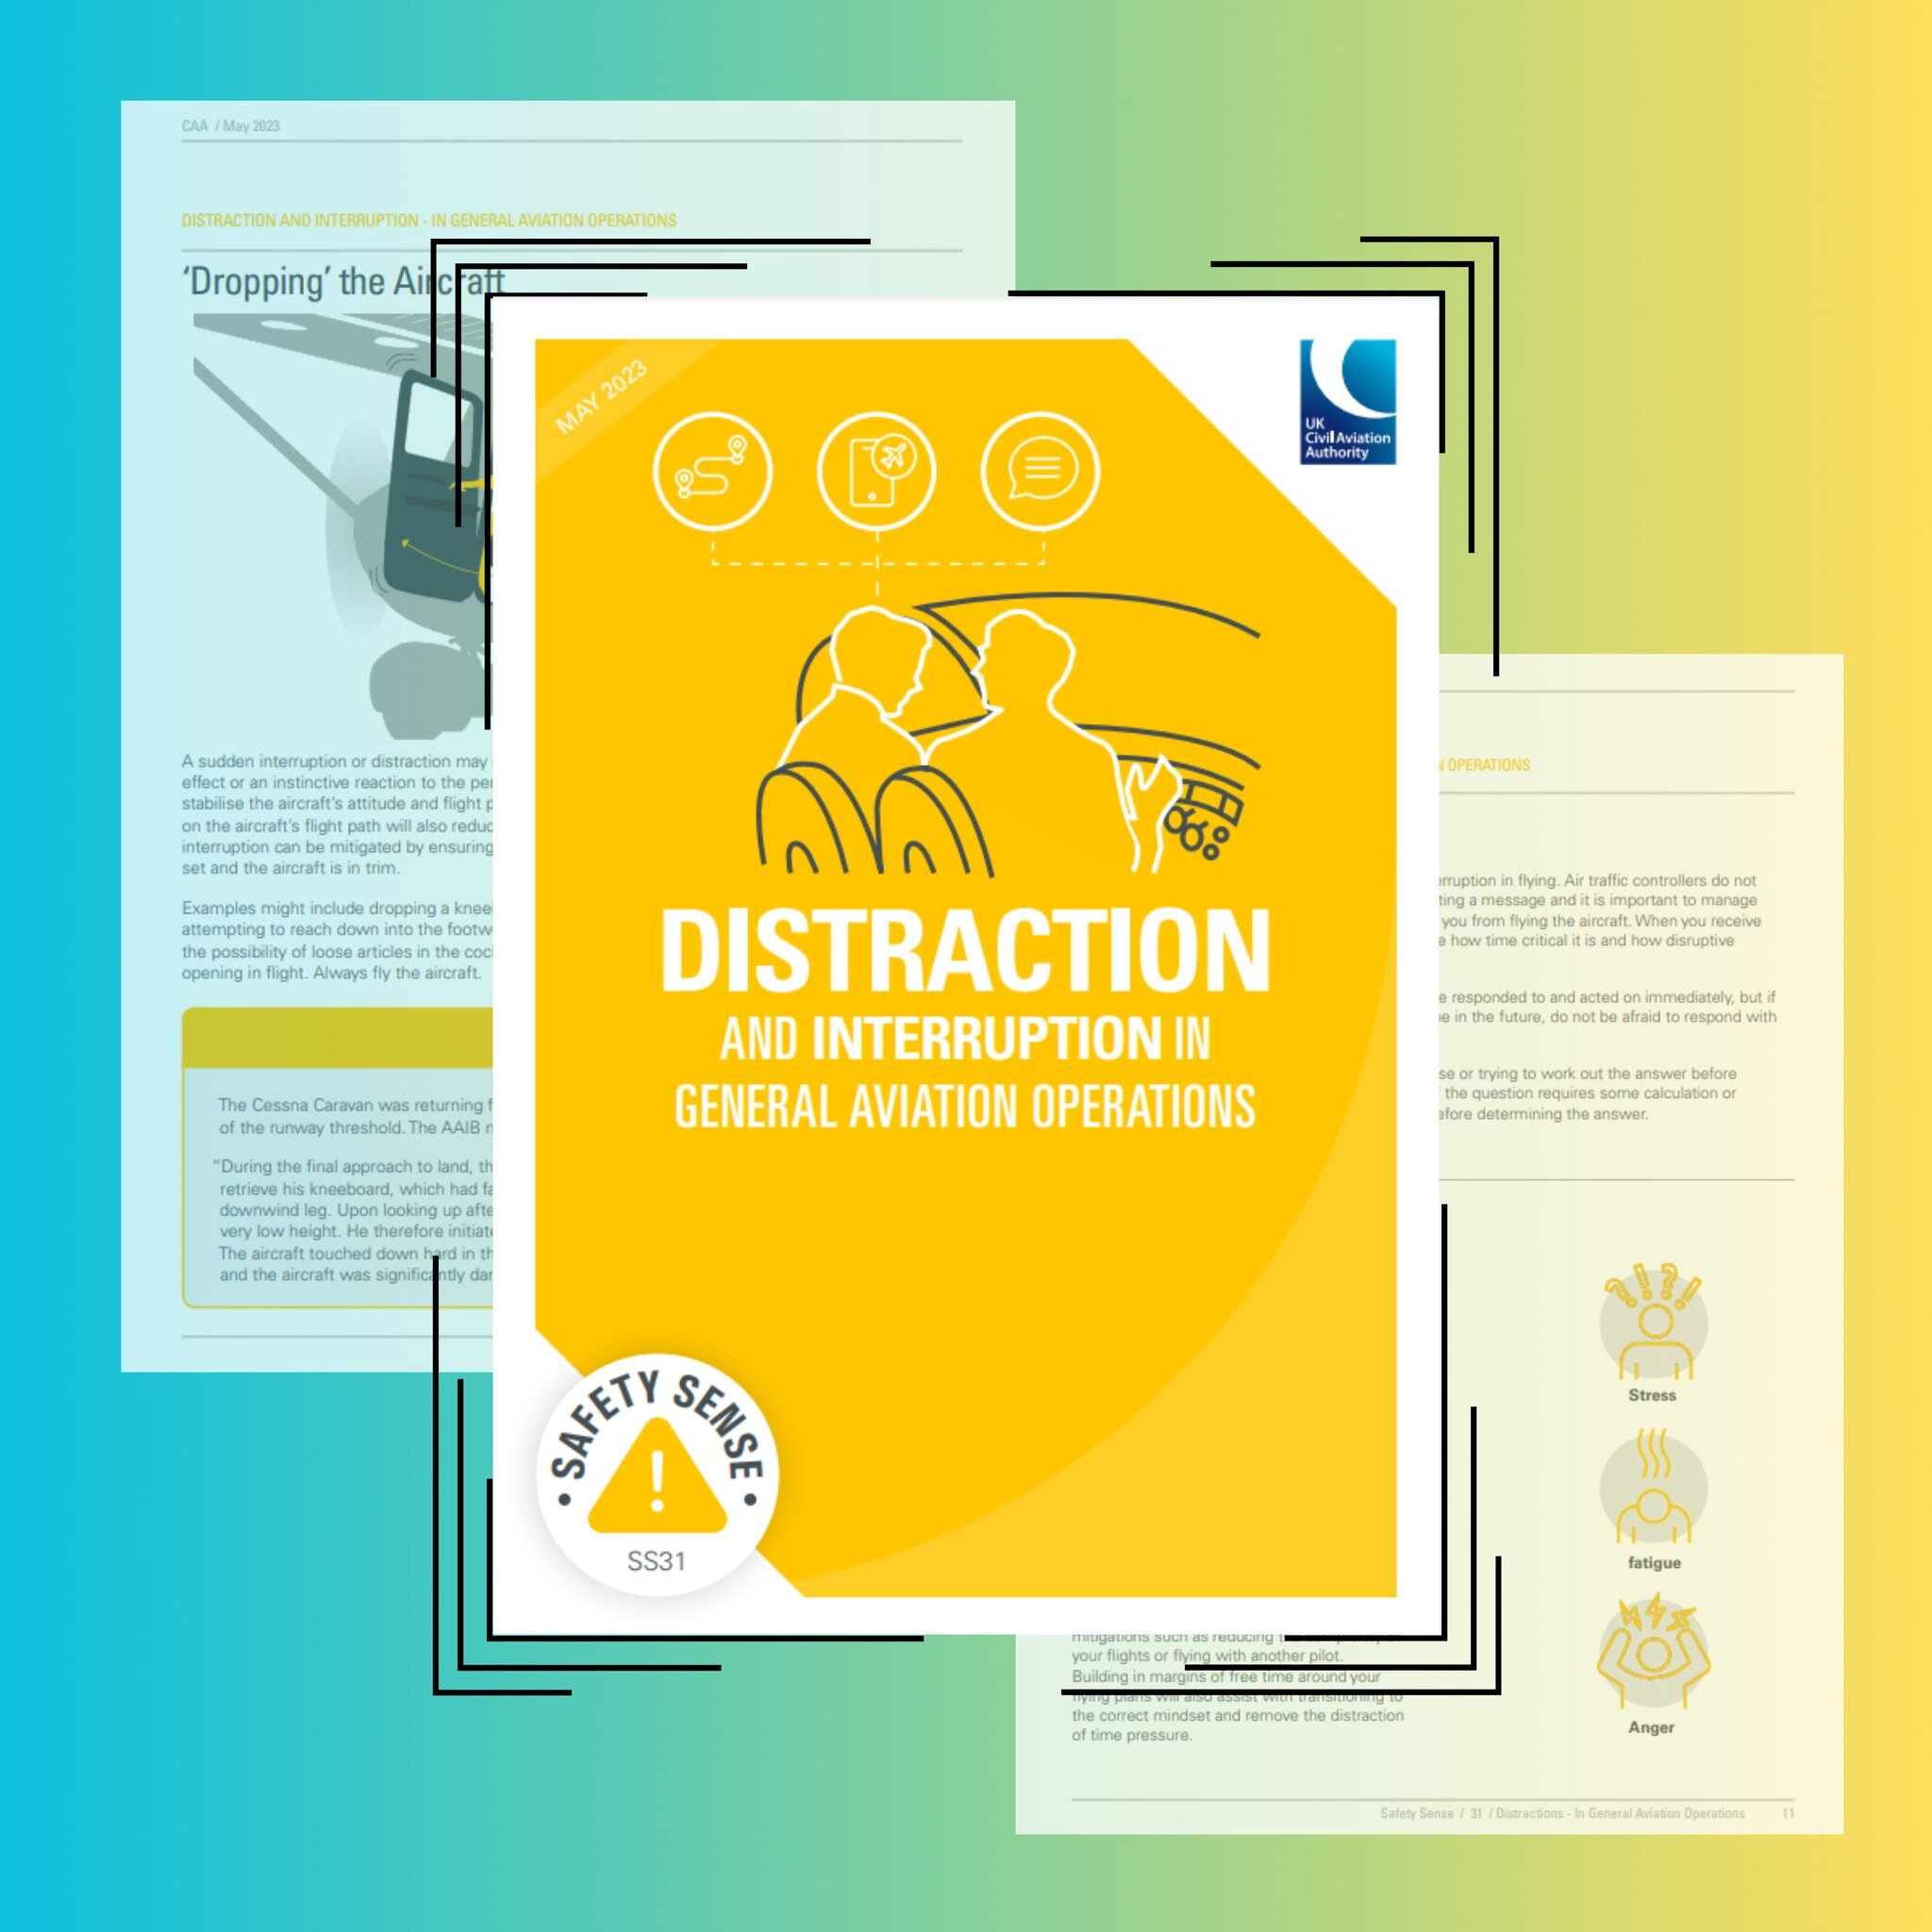 Brand new Safety Sense Leaflet by the CAA on distraction and interruption in general aviation operations. 

Check out the link in our bio to find these resources online.

 #SafetySense #CAA #safety #generalaviation #ukpilot #distraction #interruption